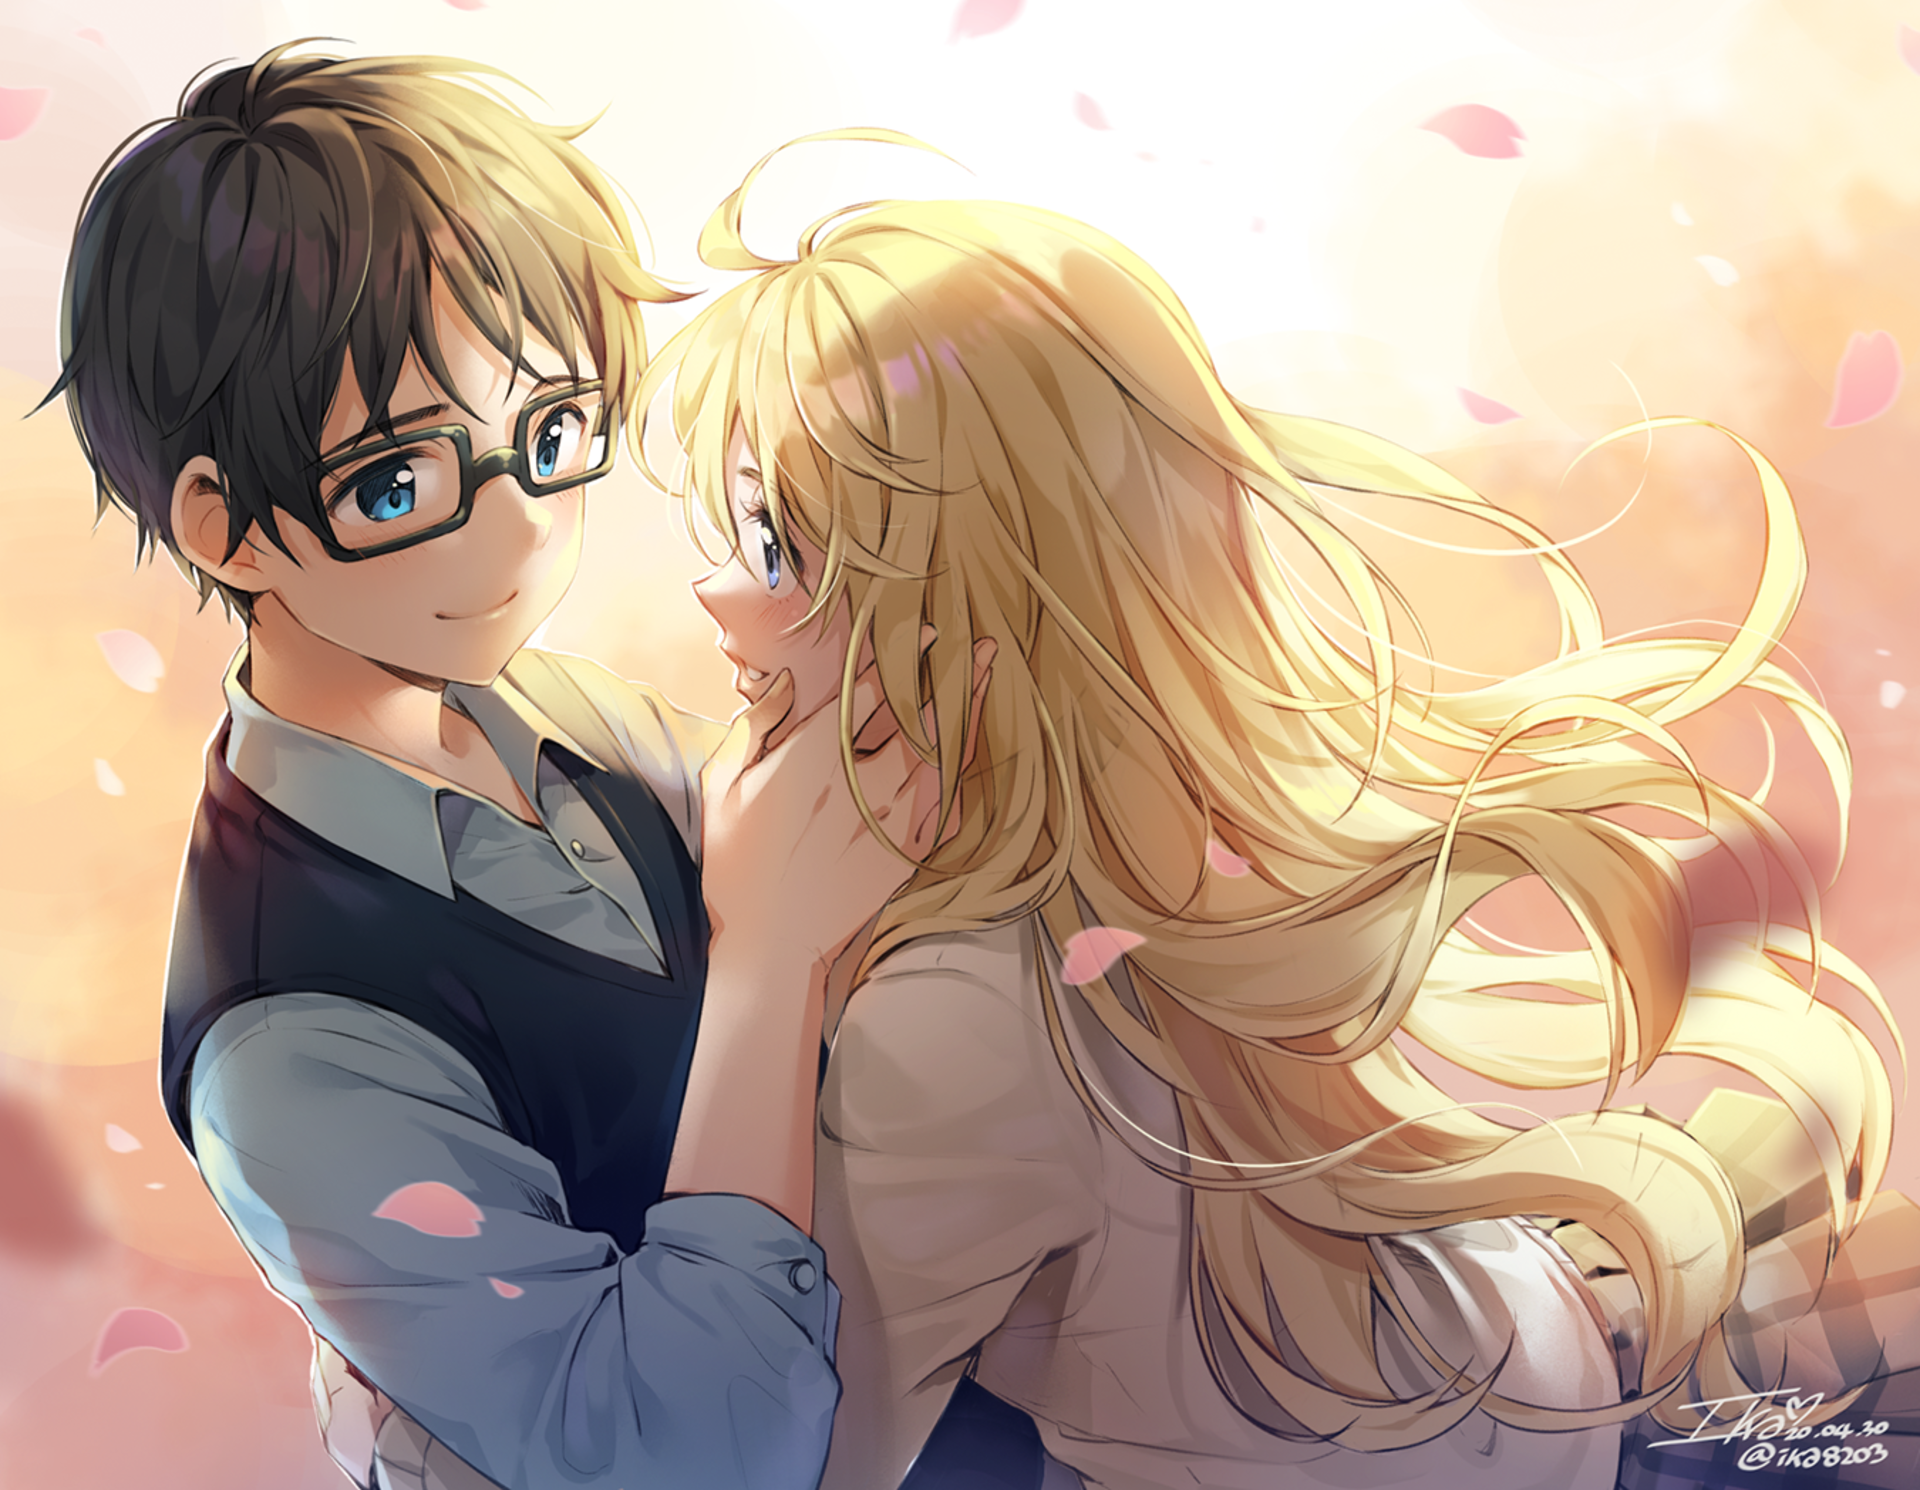 If, for example, the anime Your Lie in April has a side story, people will  want to see how the anime unfolds. Me: kousei and tsubaki's happy life, and  see if kousei